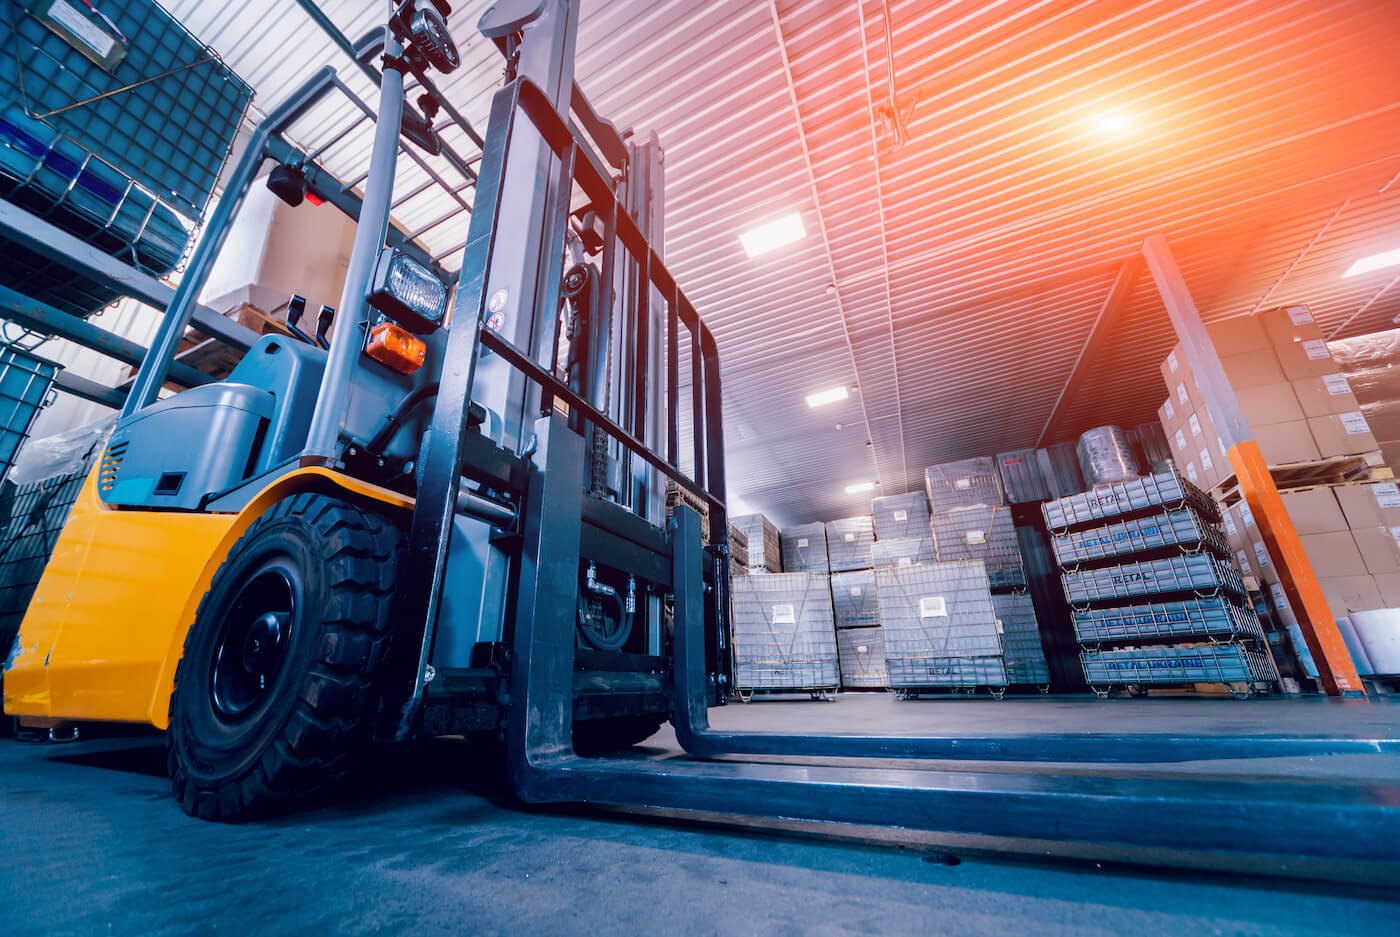 Equipment to Improve Forklift Safety at Your Warehouse